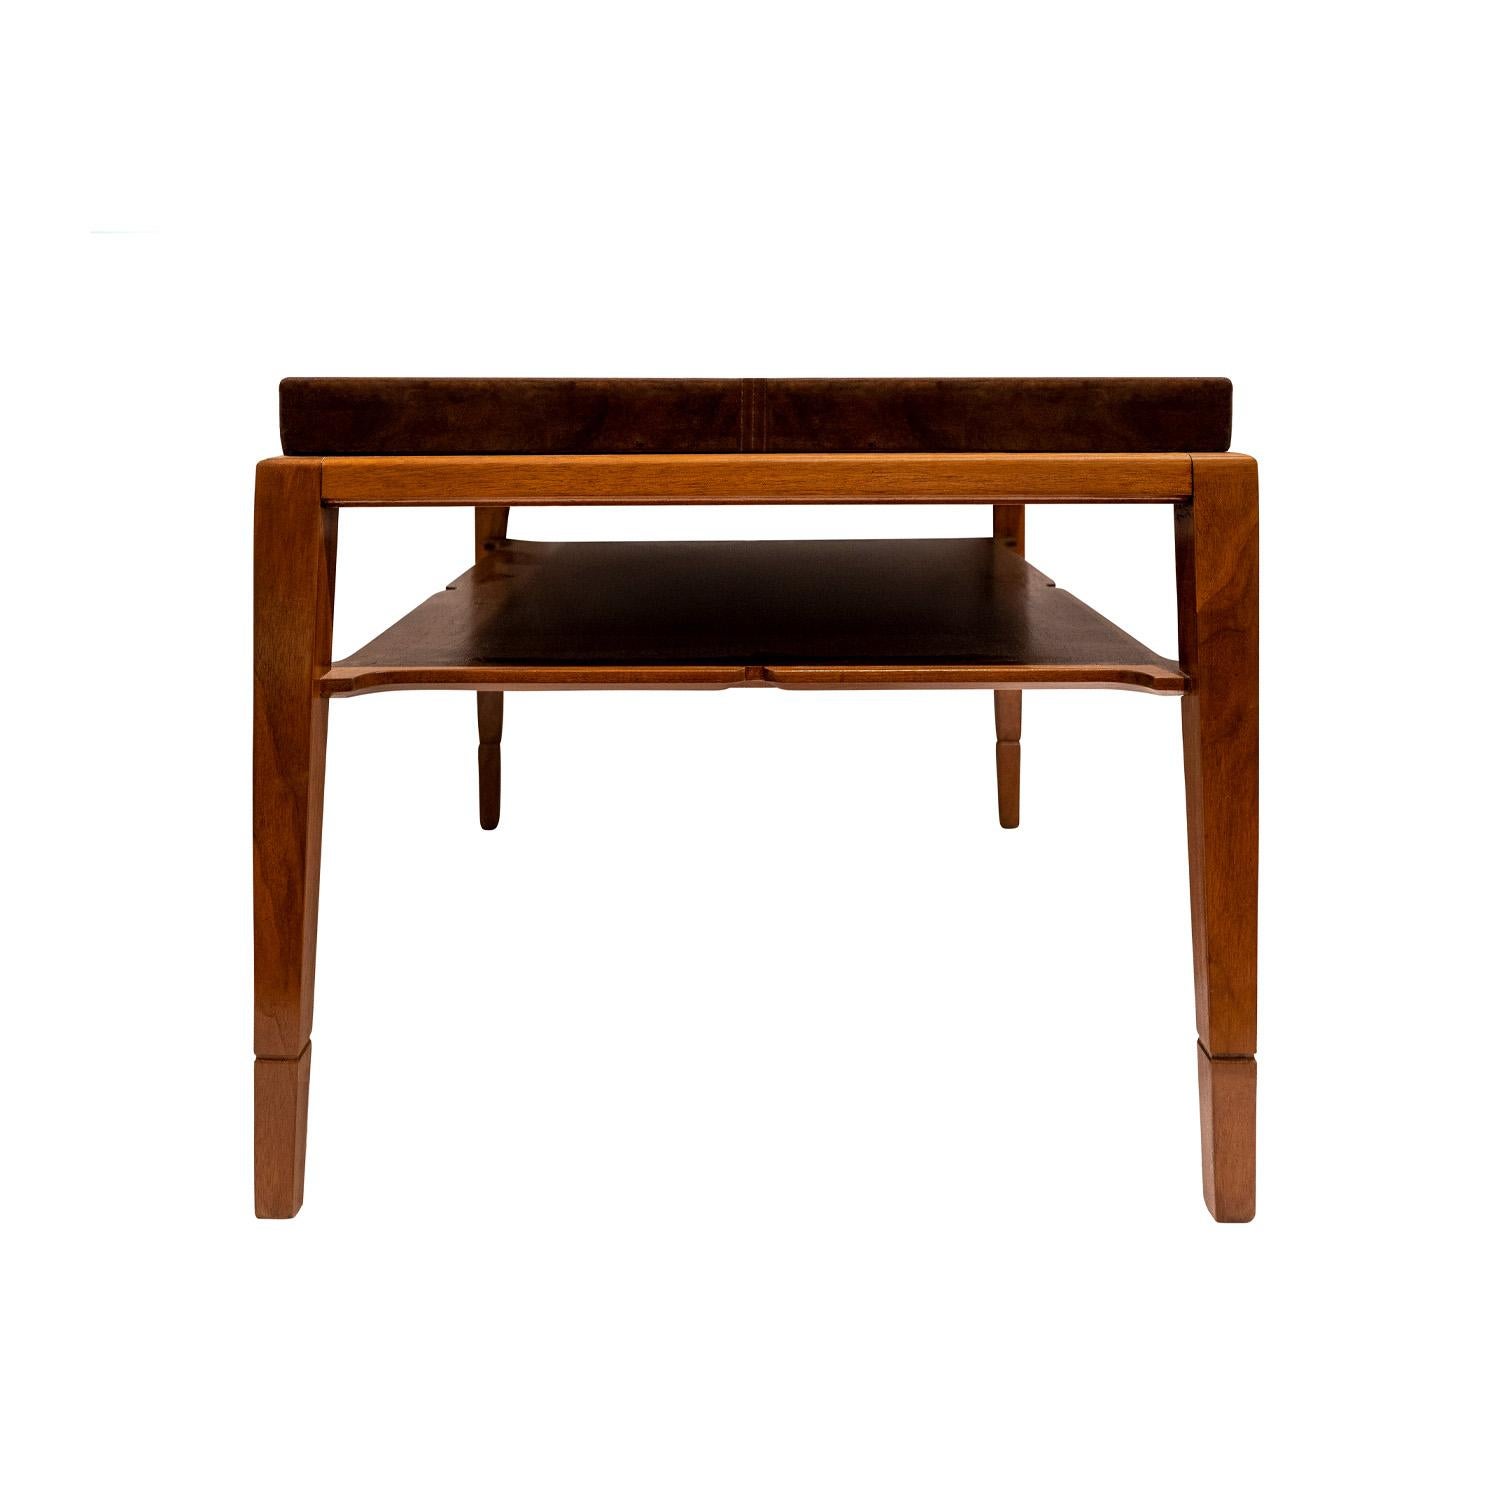 Mid-Century Modern Tommi Parzinger Finely Crafted Pair of Mahogany Tables with Leather Tops 1940s For Sale